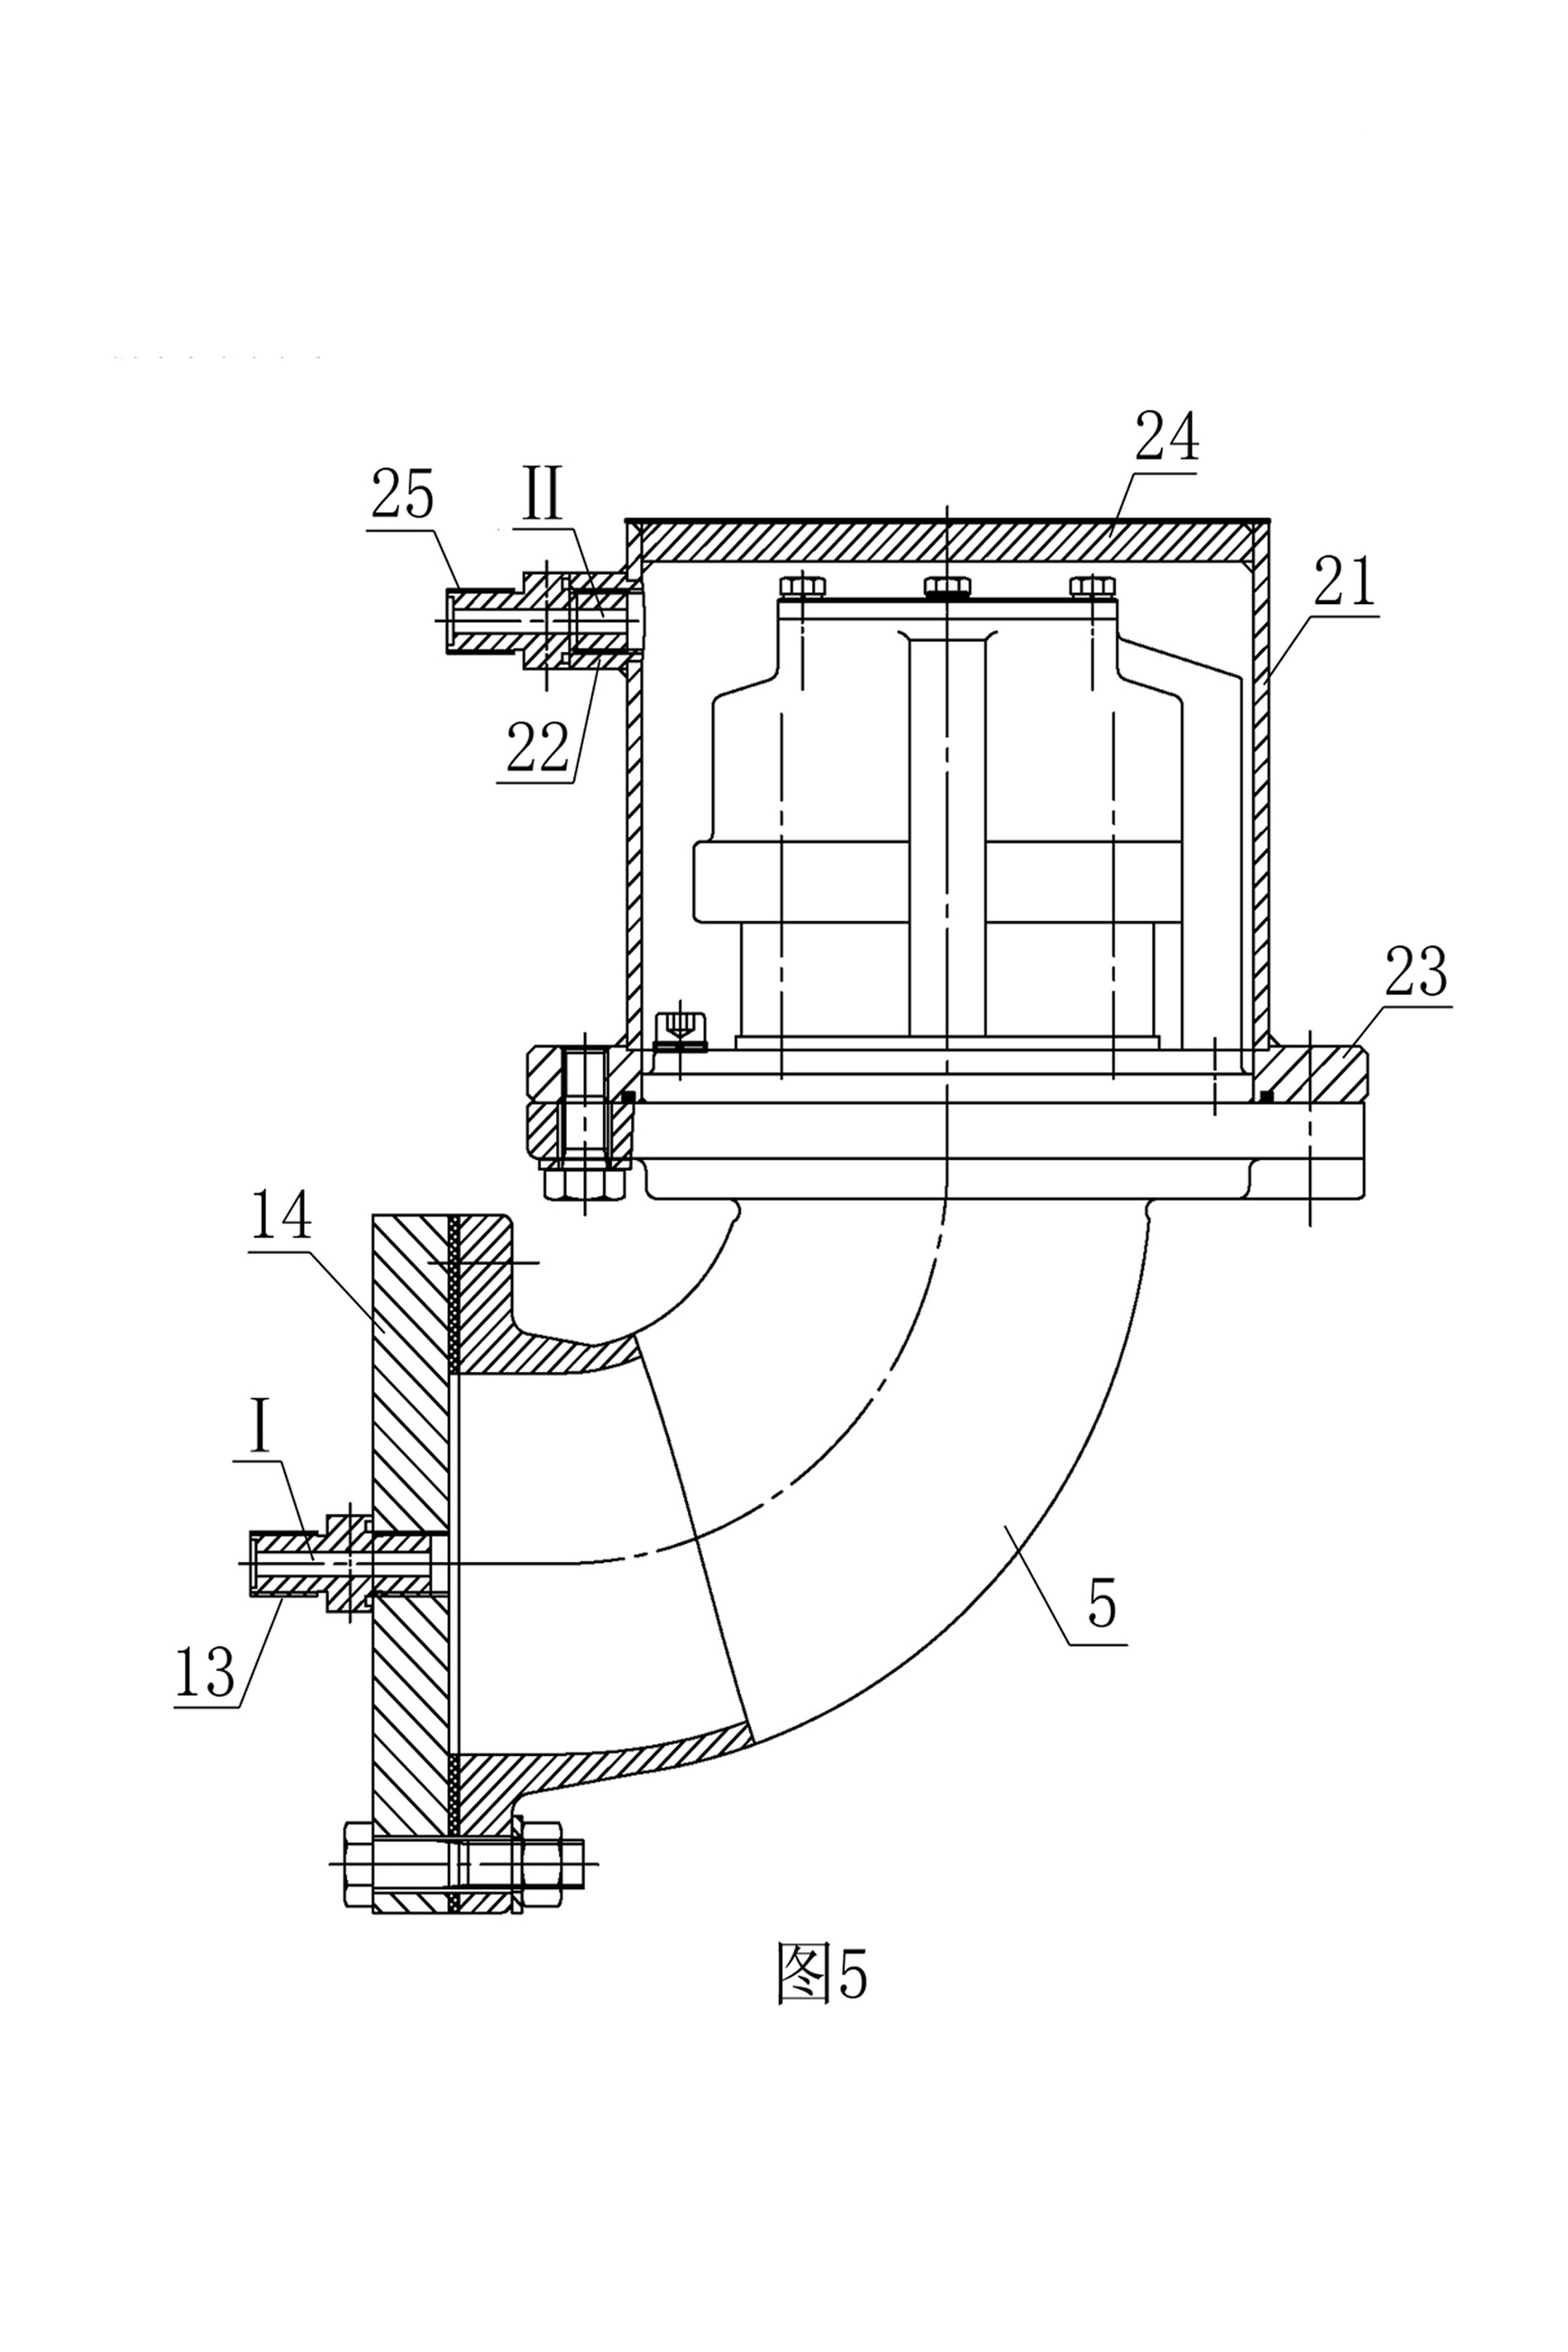 Device and method for detecting subsea valve in laboratory